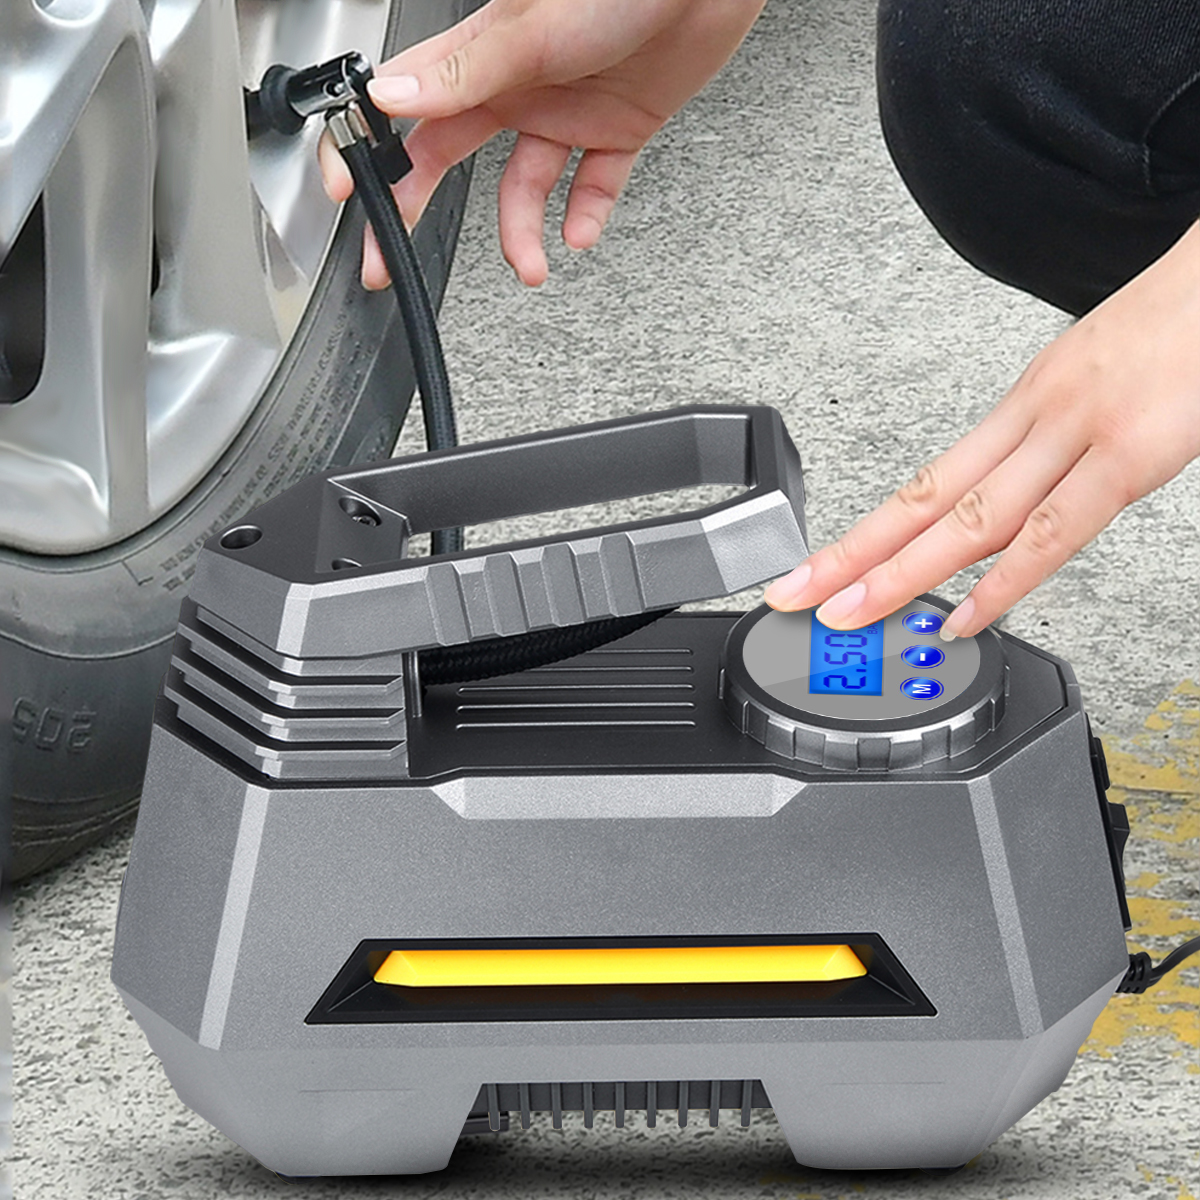 

120W 150PSI Portable Air Compressor Car Tire Tyre Inflator